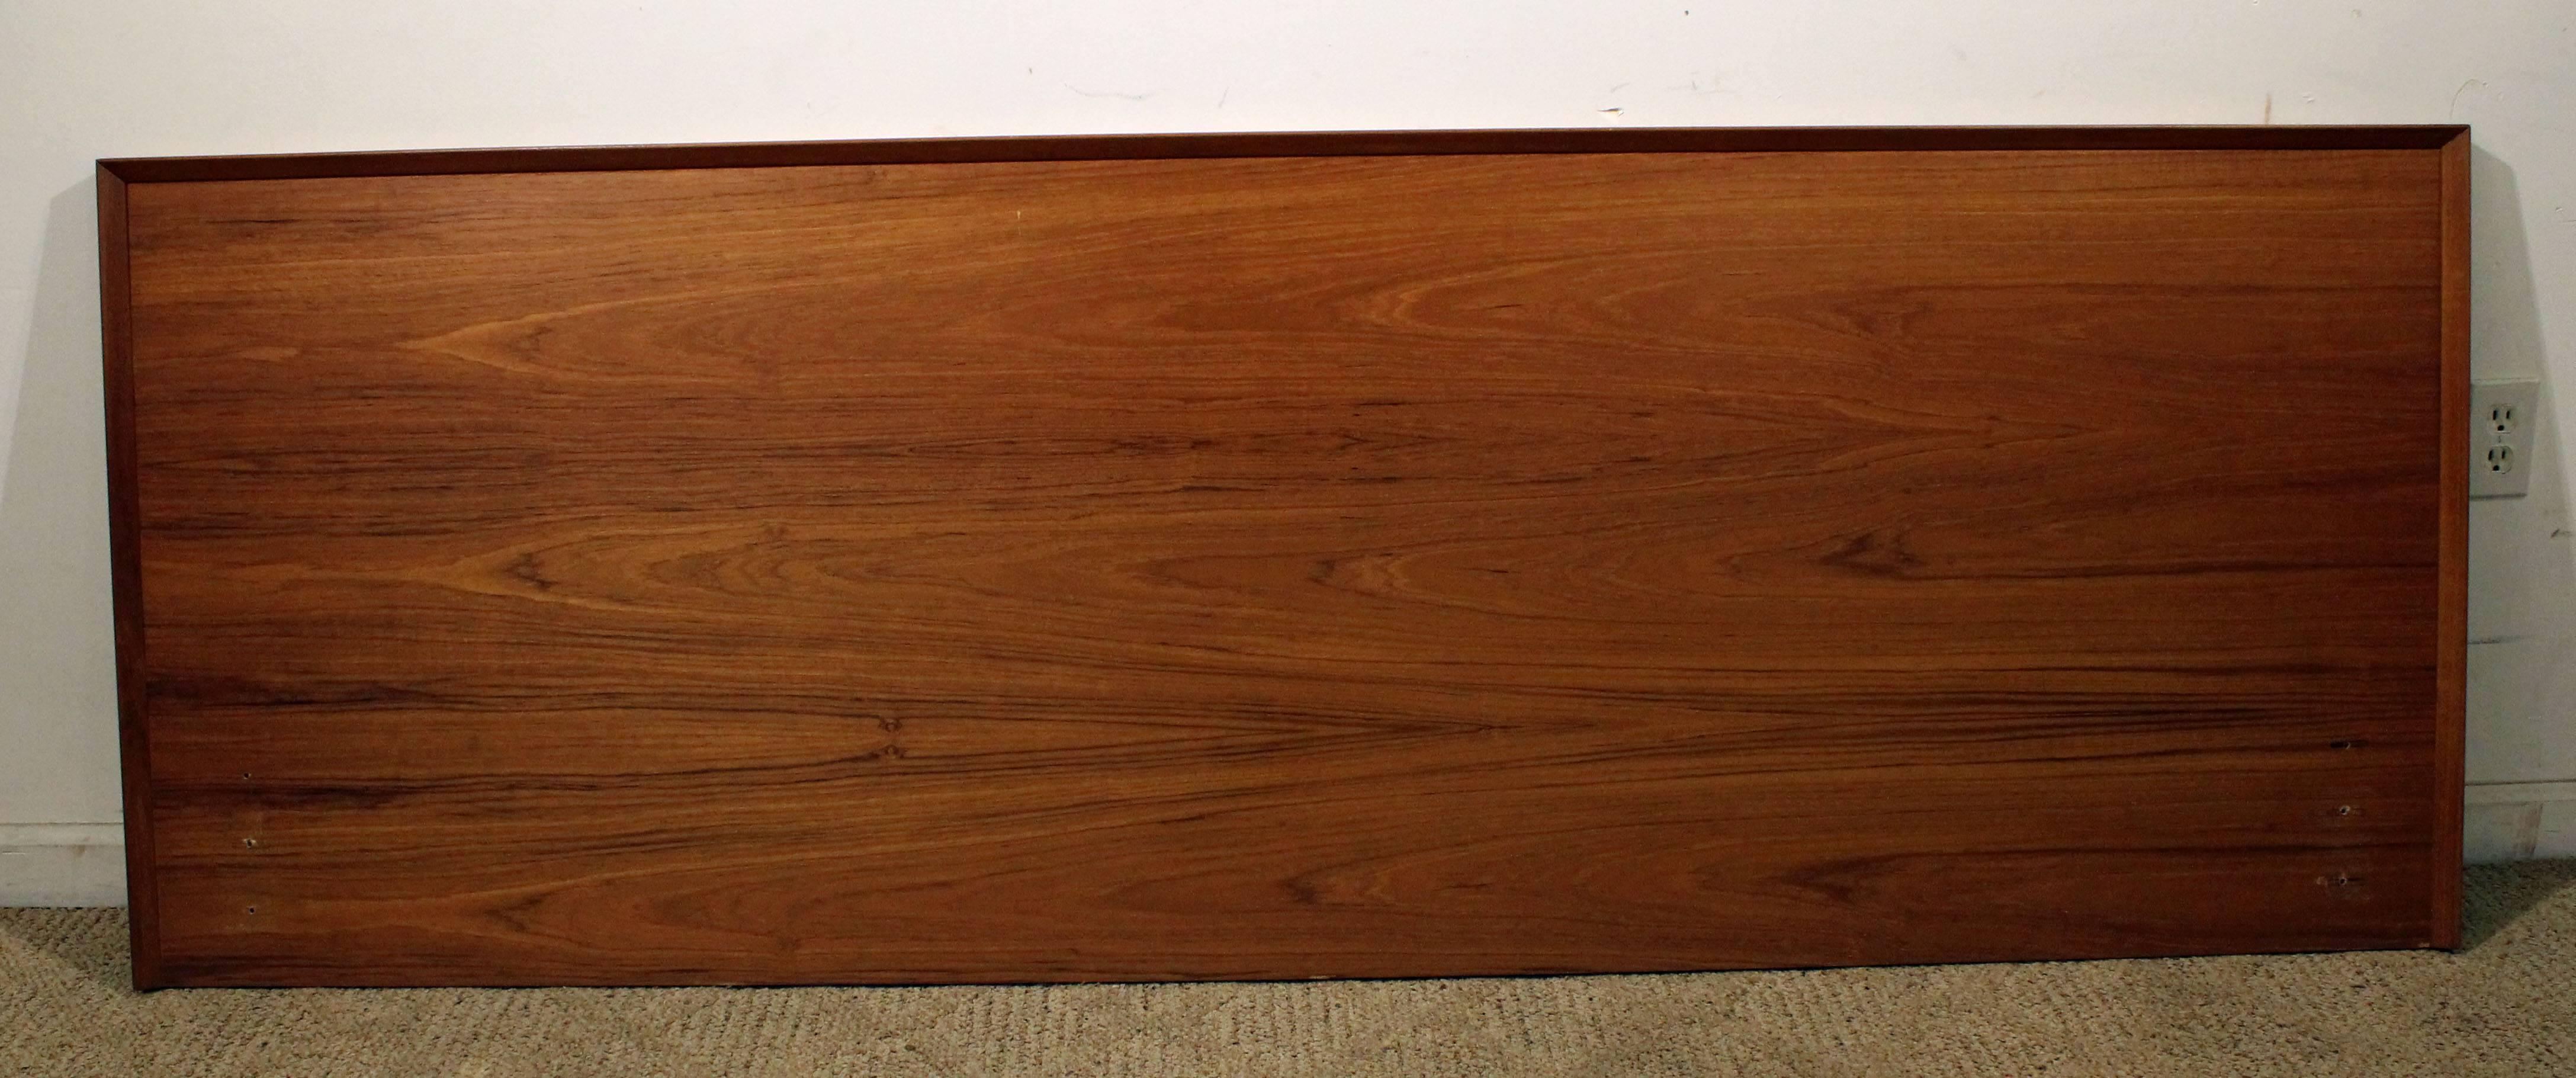 Offered is a Teak king-size headboard. This headboard will fit a king-size mattress.

Dimensions: 82.5